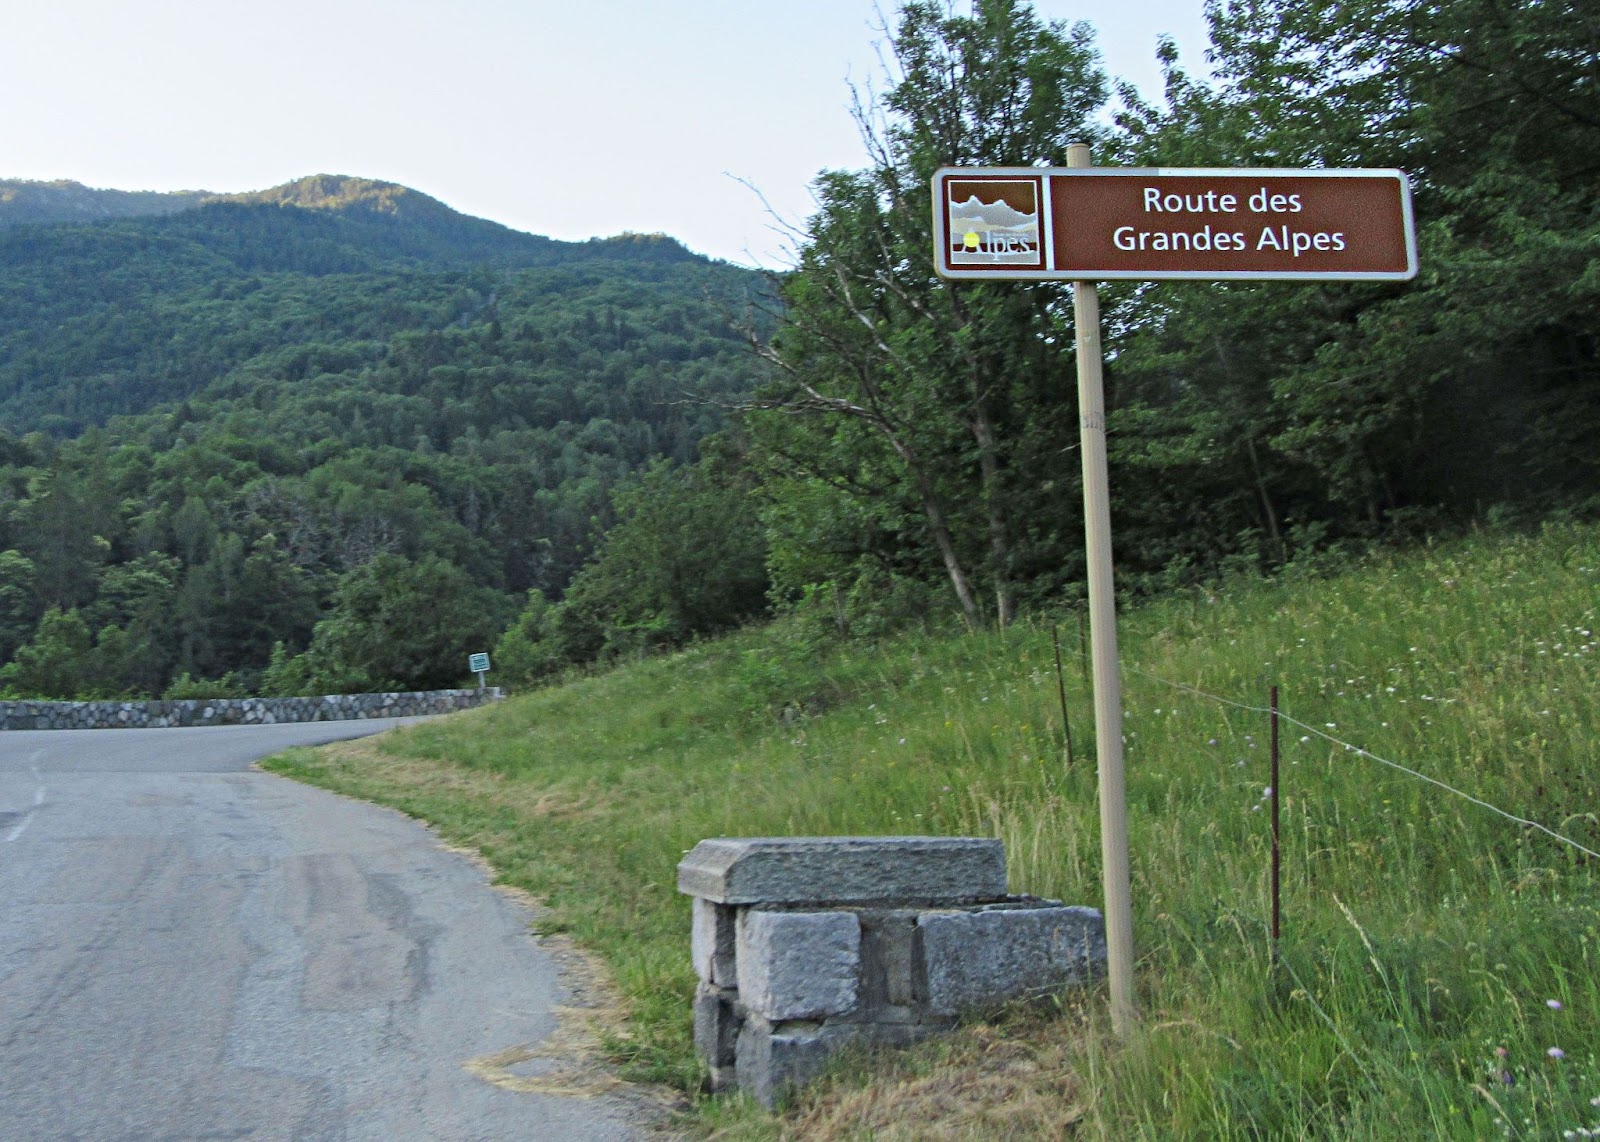 Cycling Col du Galibier from Valloire: stone bricks next to sign for Route des Grandes Alpes